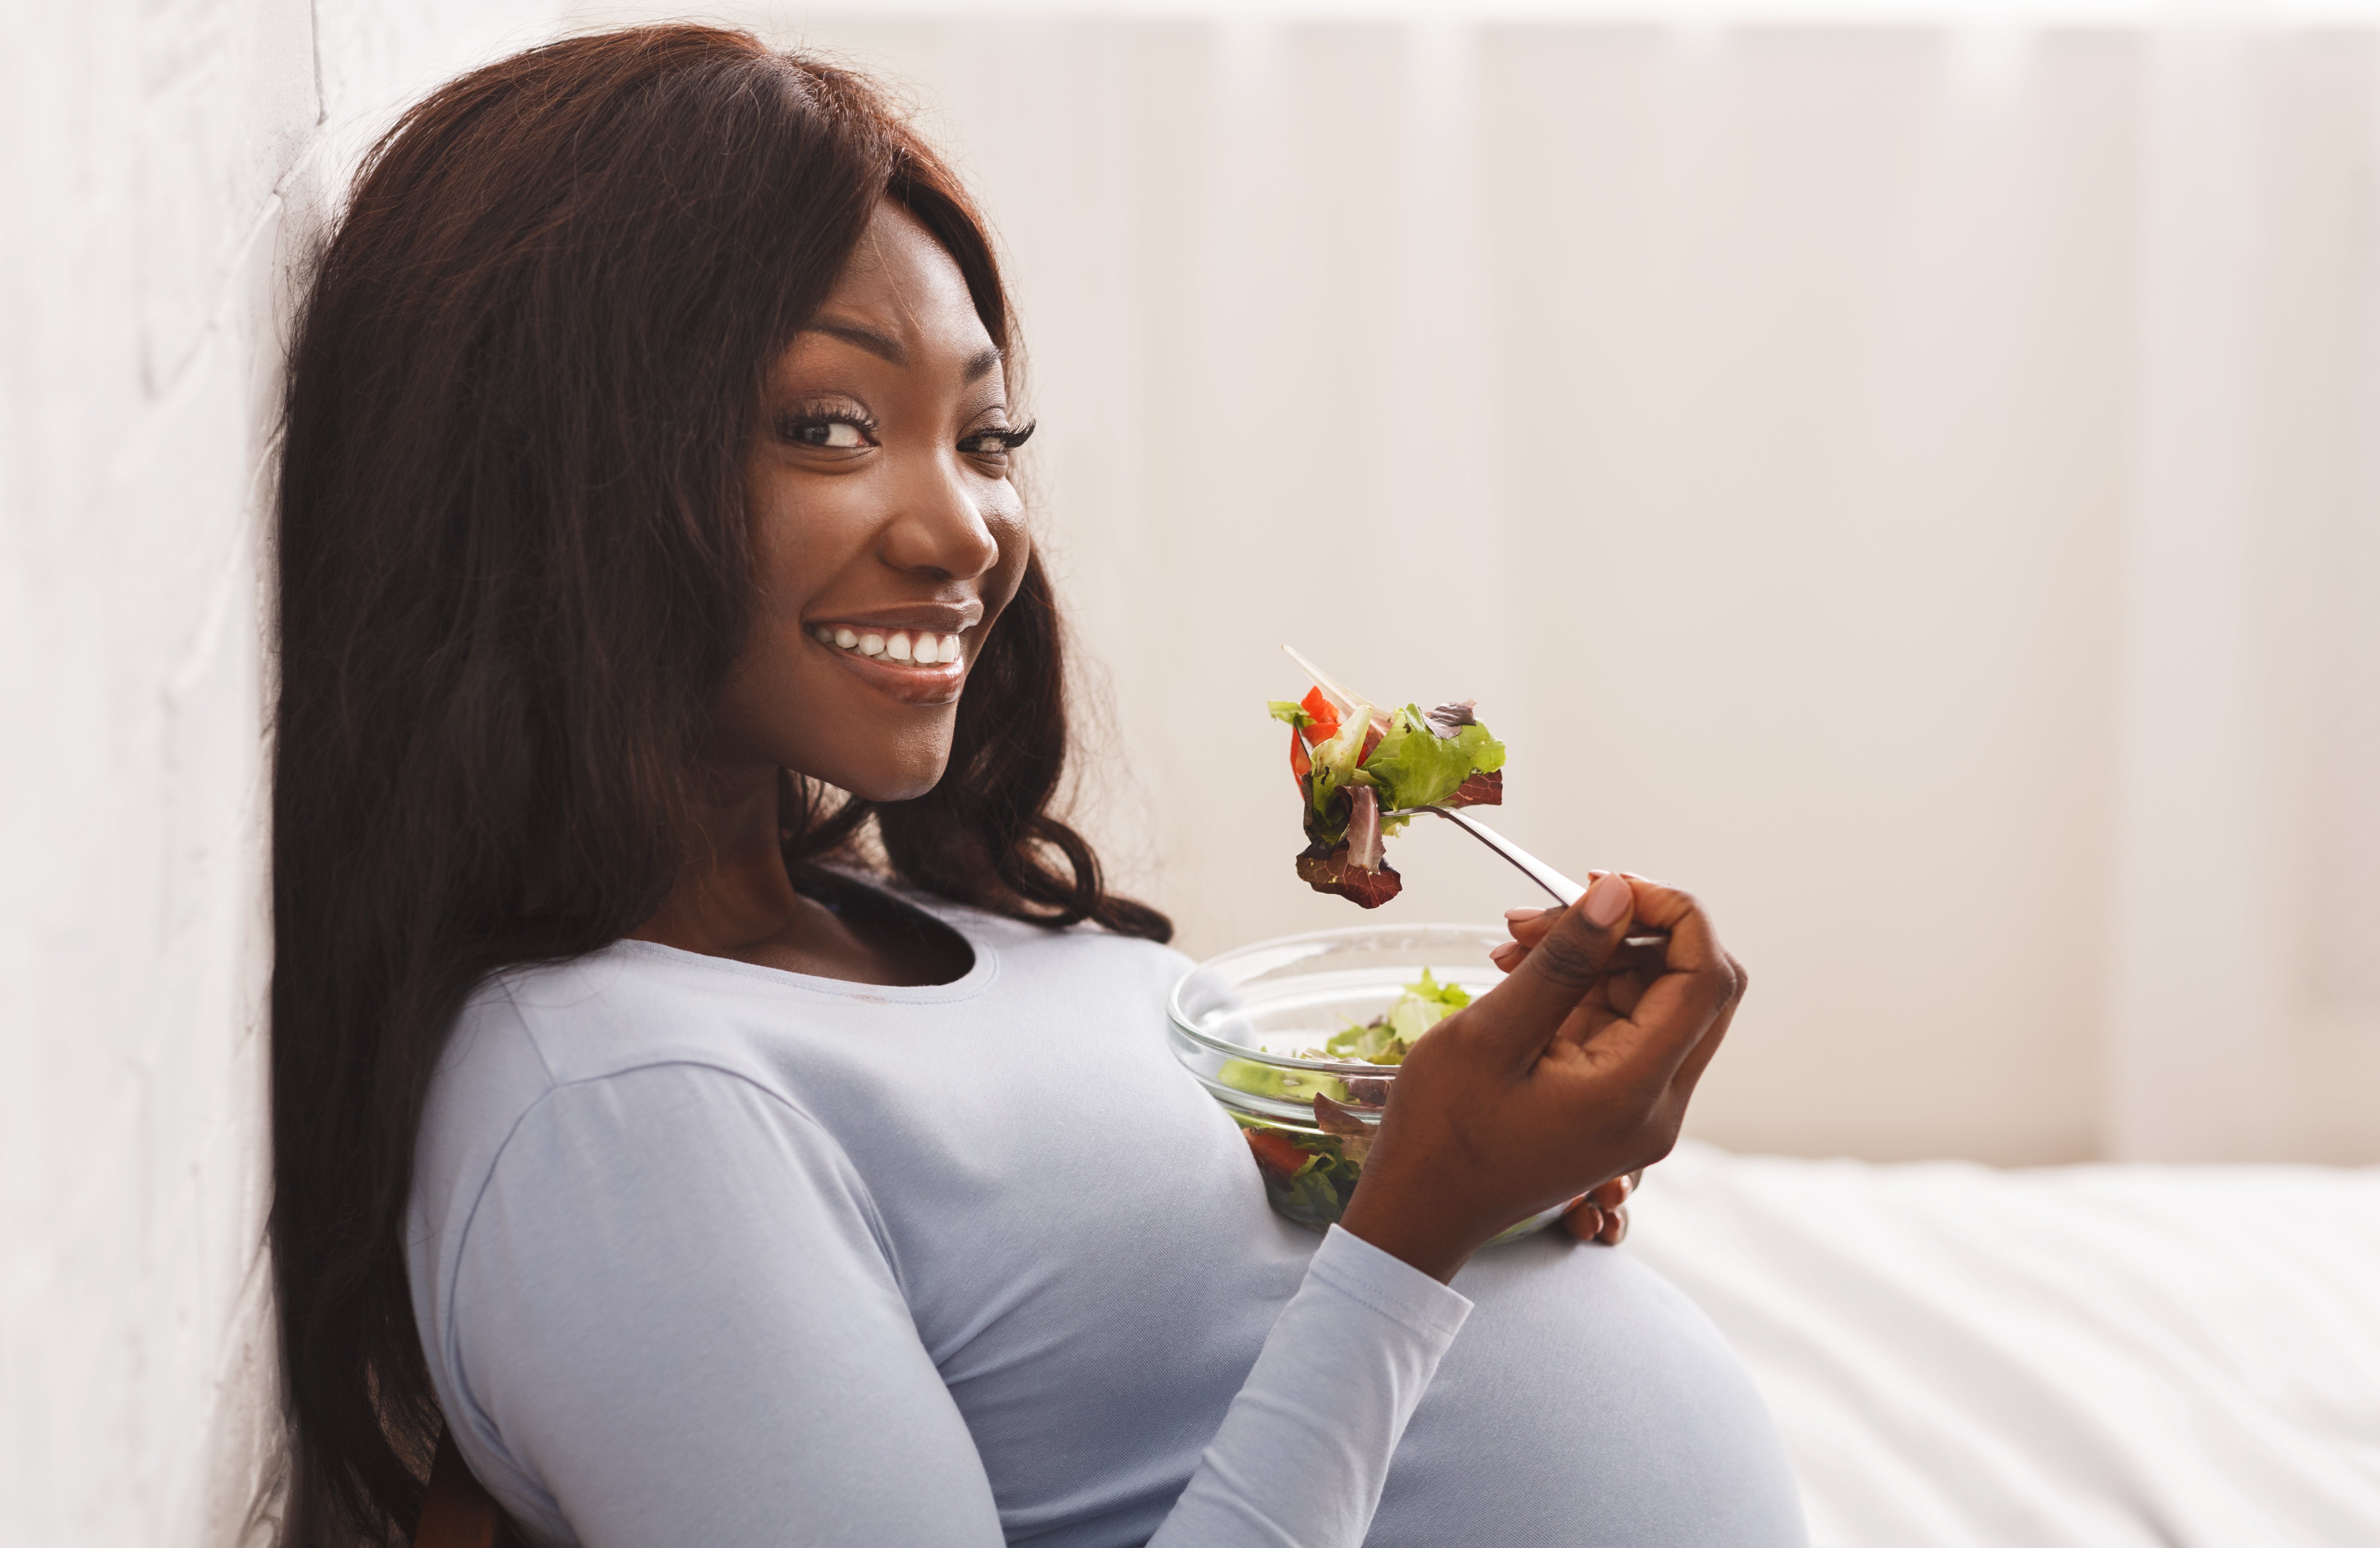 Smiling pregnant woman eating a healthy salad.